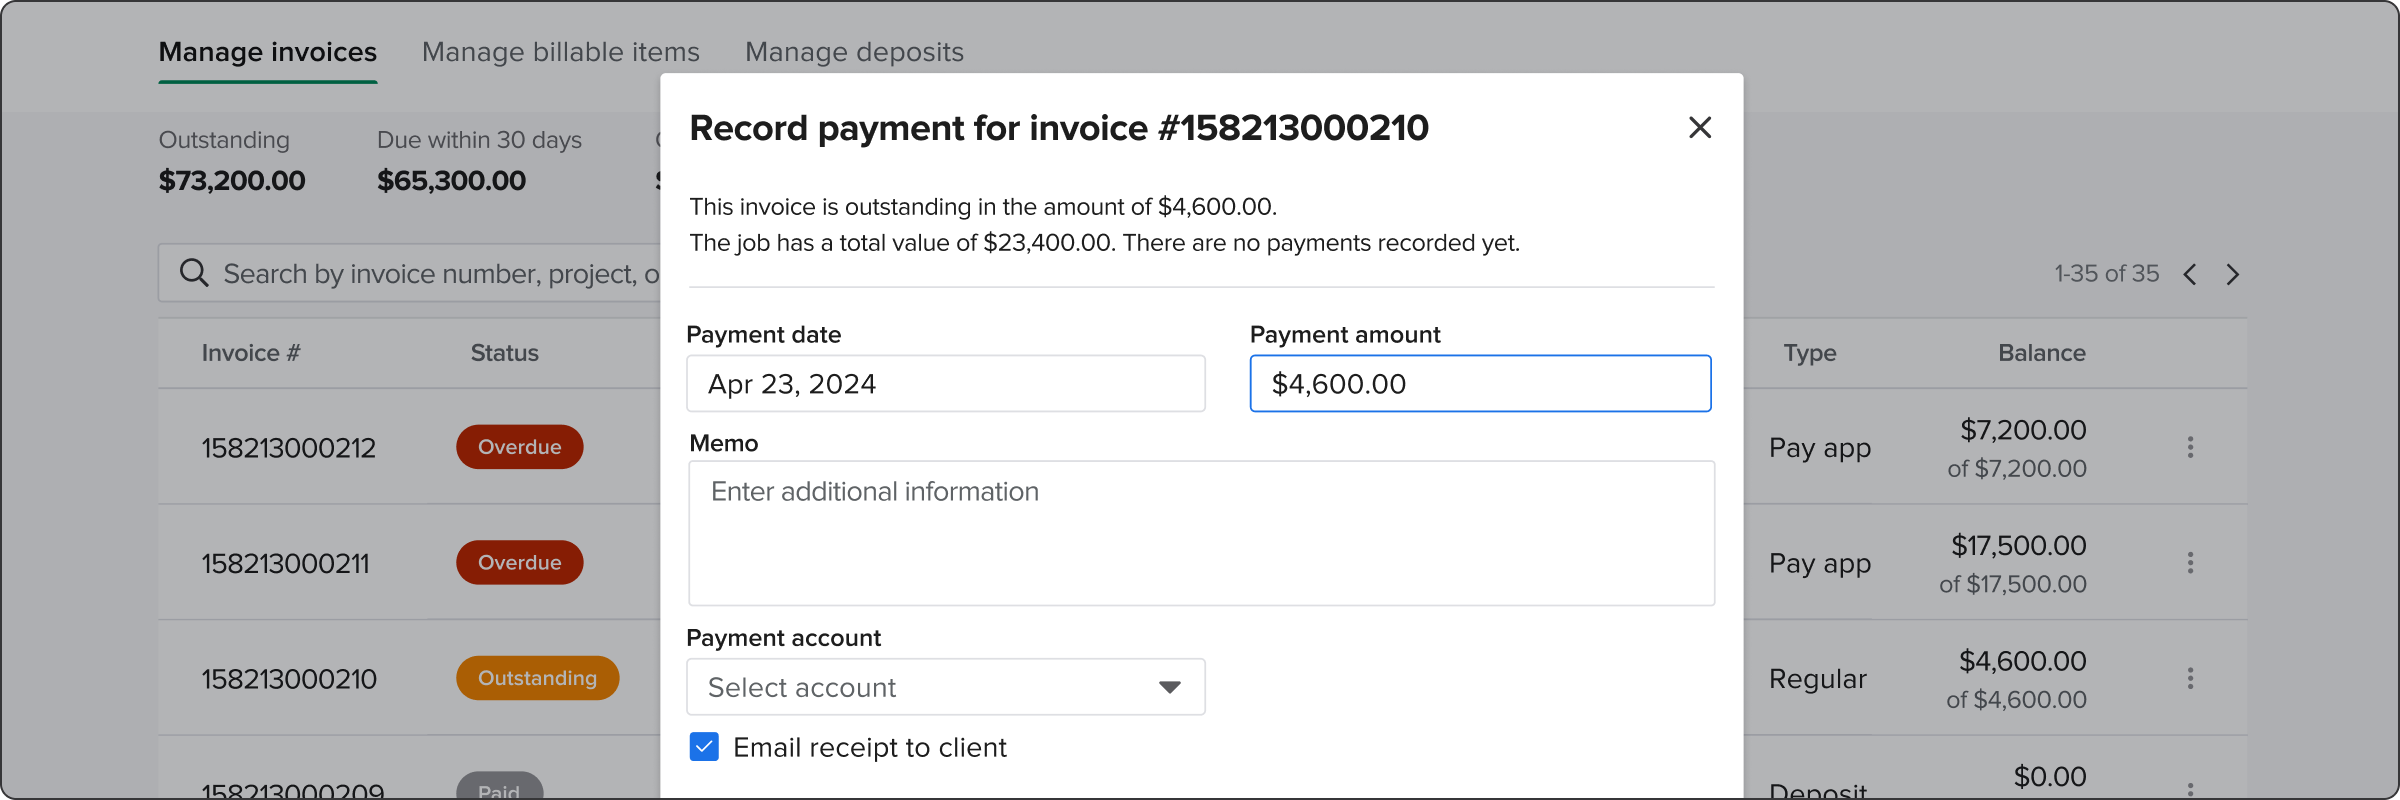 Product view displaying how to record payment for an outstanding invoice | Trade contractor | Knowify